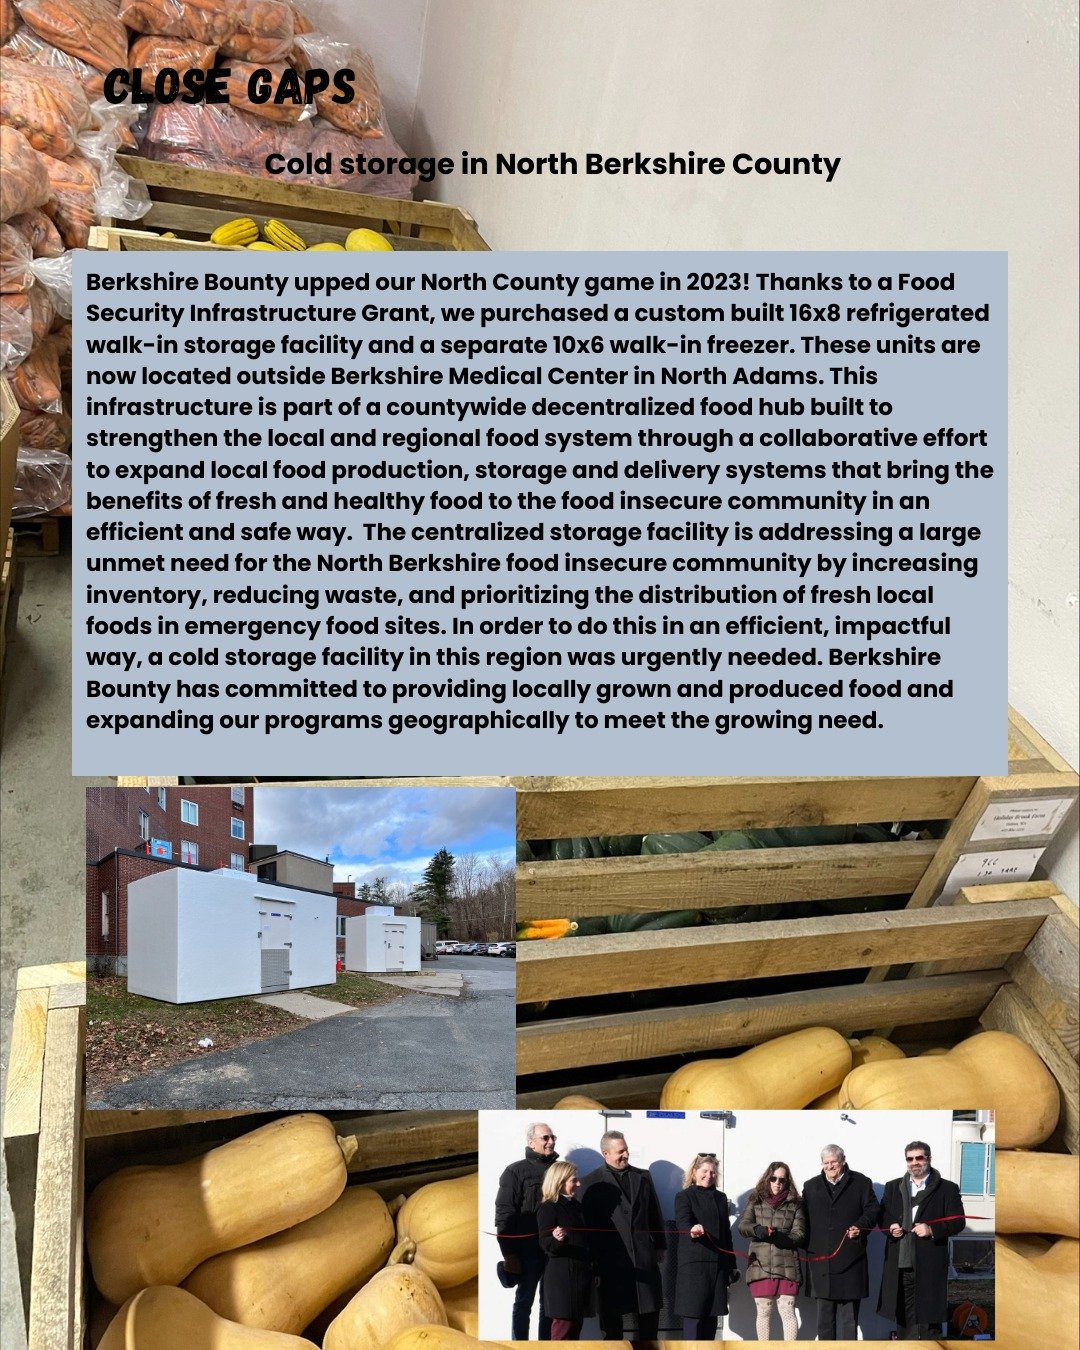 In 2023 Berkshire Bounty purchased a refrigerated walk-in facility and separate walk-in freezer located in North Adams. This infrastructure is part of a countywide decentralized food hub built to strengthen the local and regional food system through 